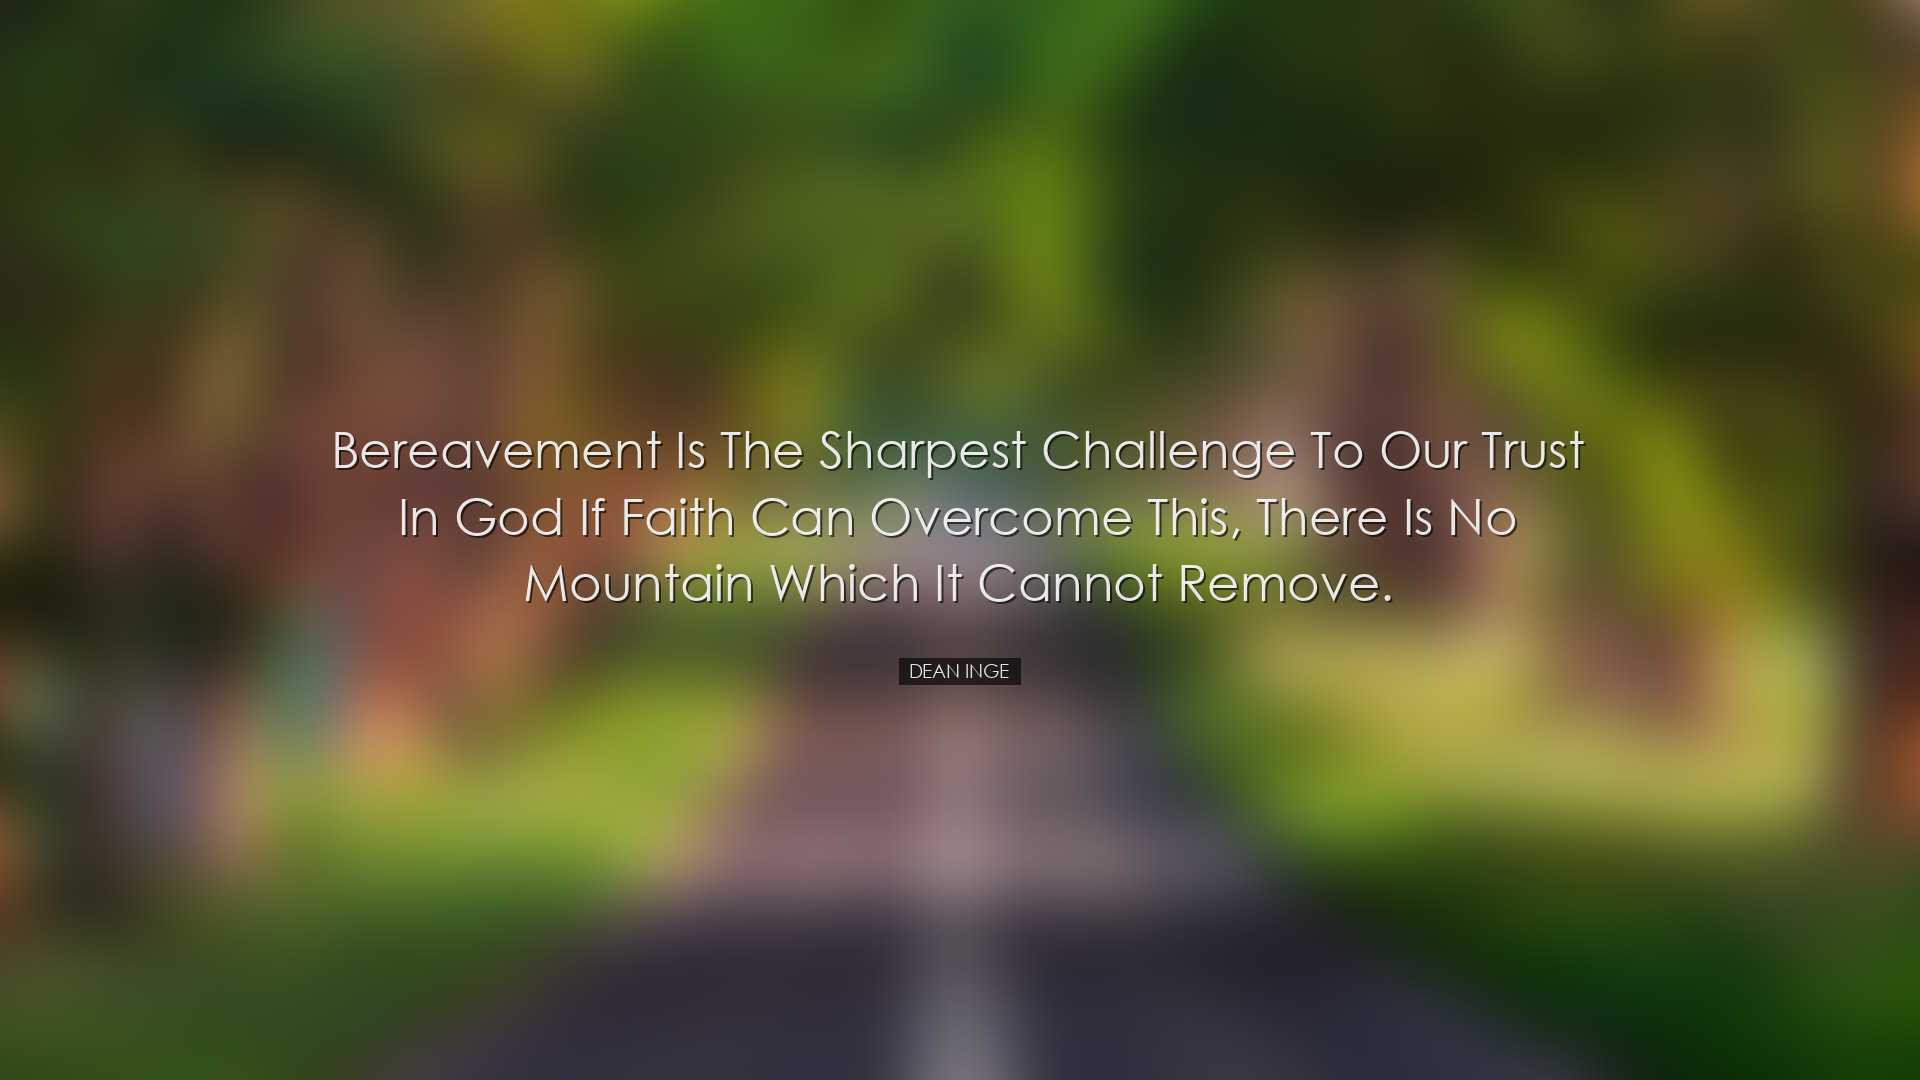 Bereavement is the sharpest challenge to our trust in God if faith